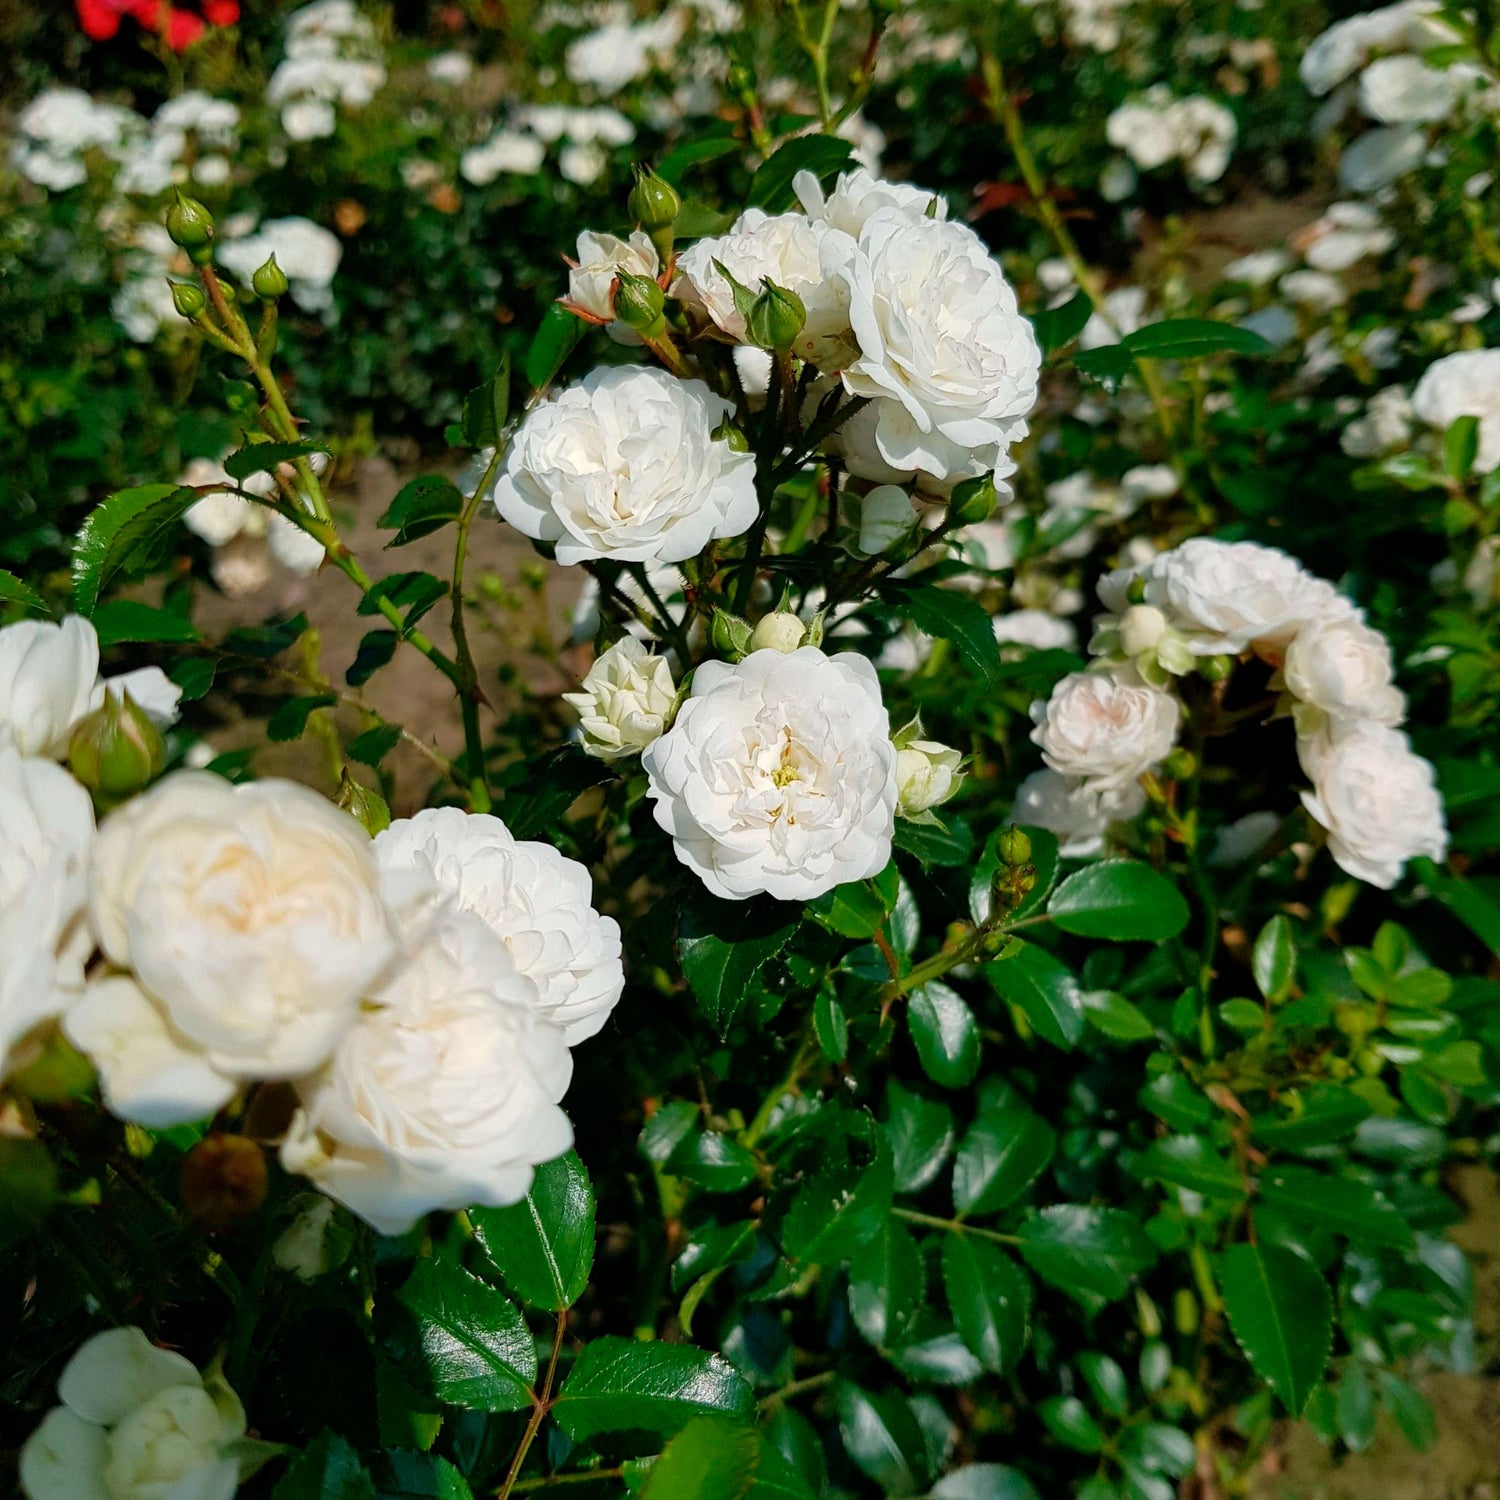 Ground-covering roses